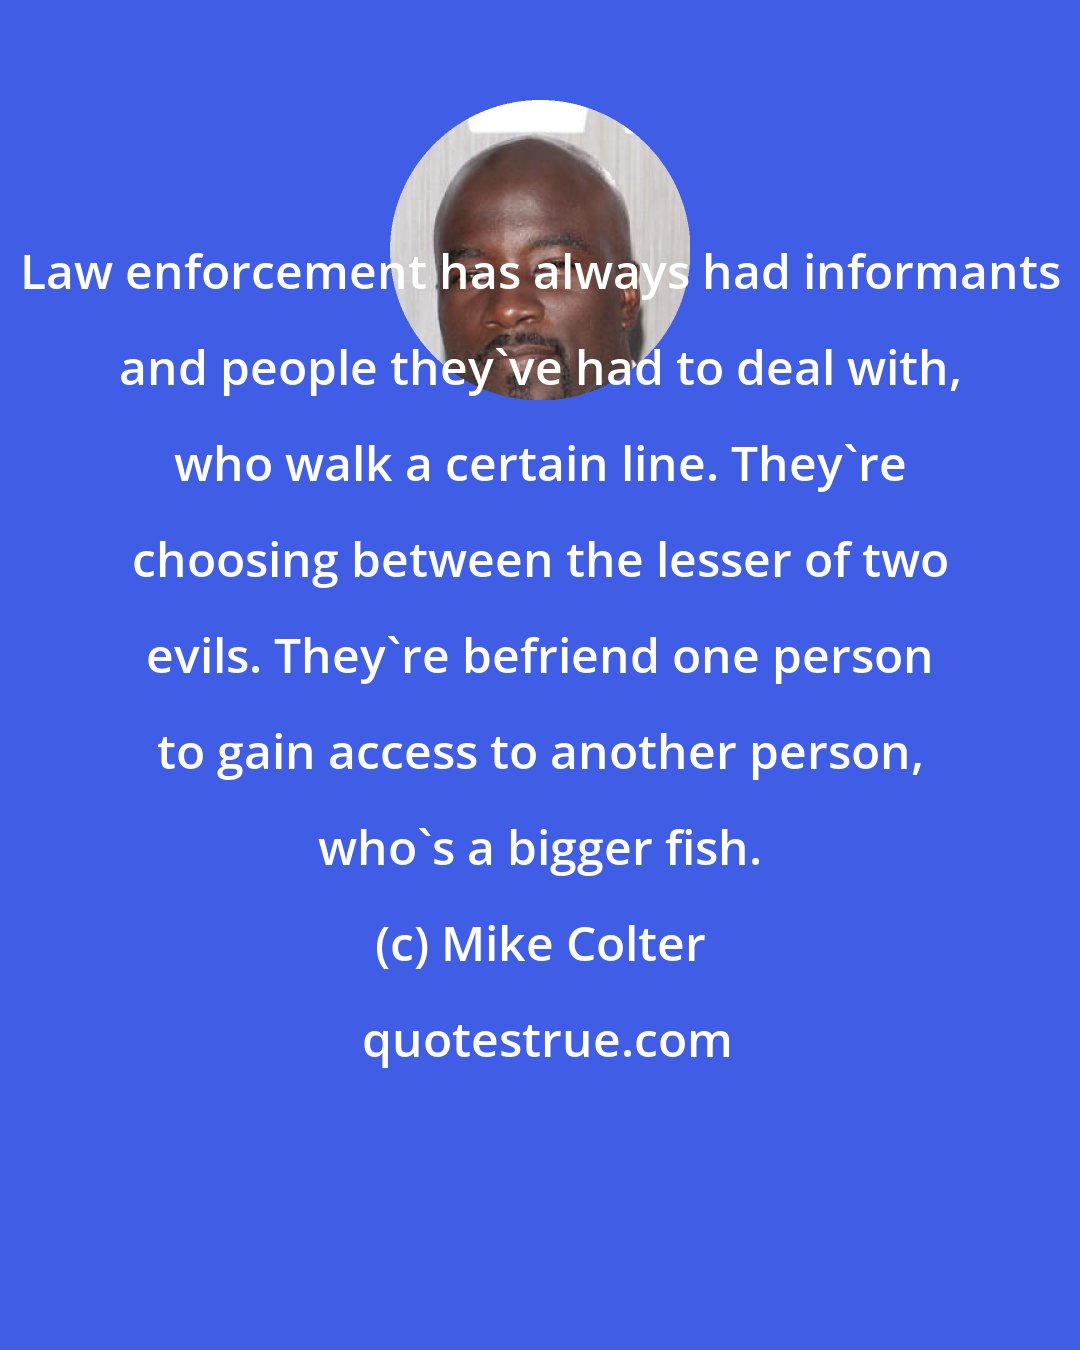 Mike Colter: Law enforcement has always had informants and people they've had to deal with, who walk a certain line. They're choosing between the lesser of two evils. They're befriend one person to gain access to another person, who's a bigger fish.